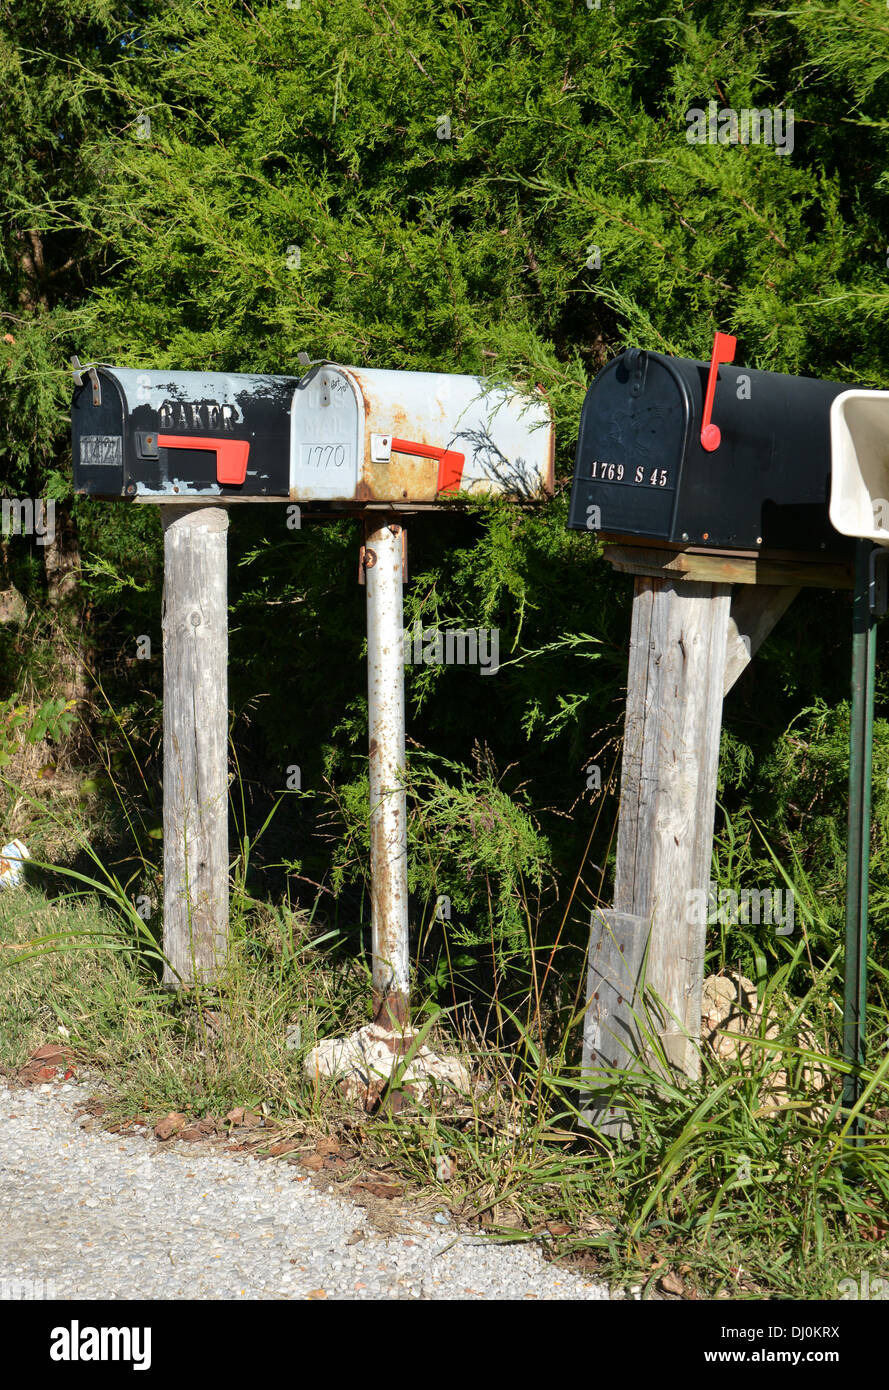 3 US Mail boxes on a rural road in America Stock Photo